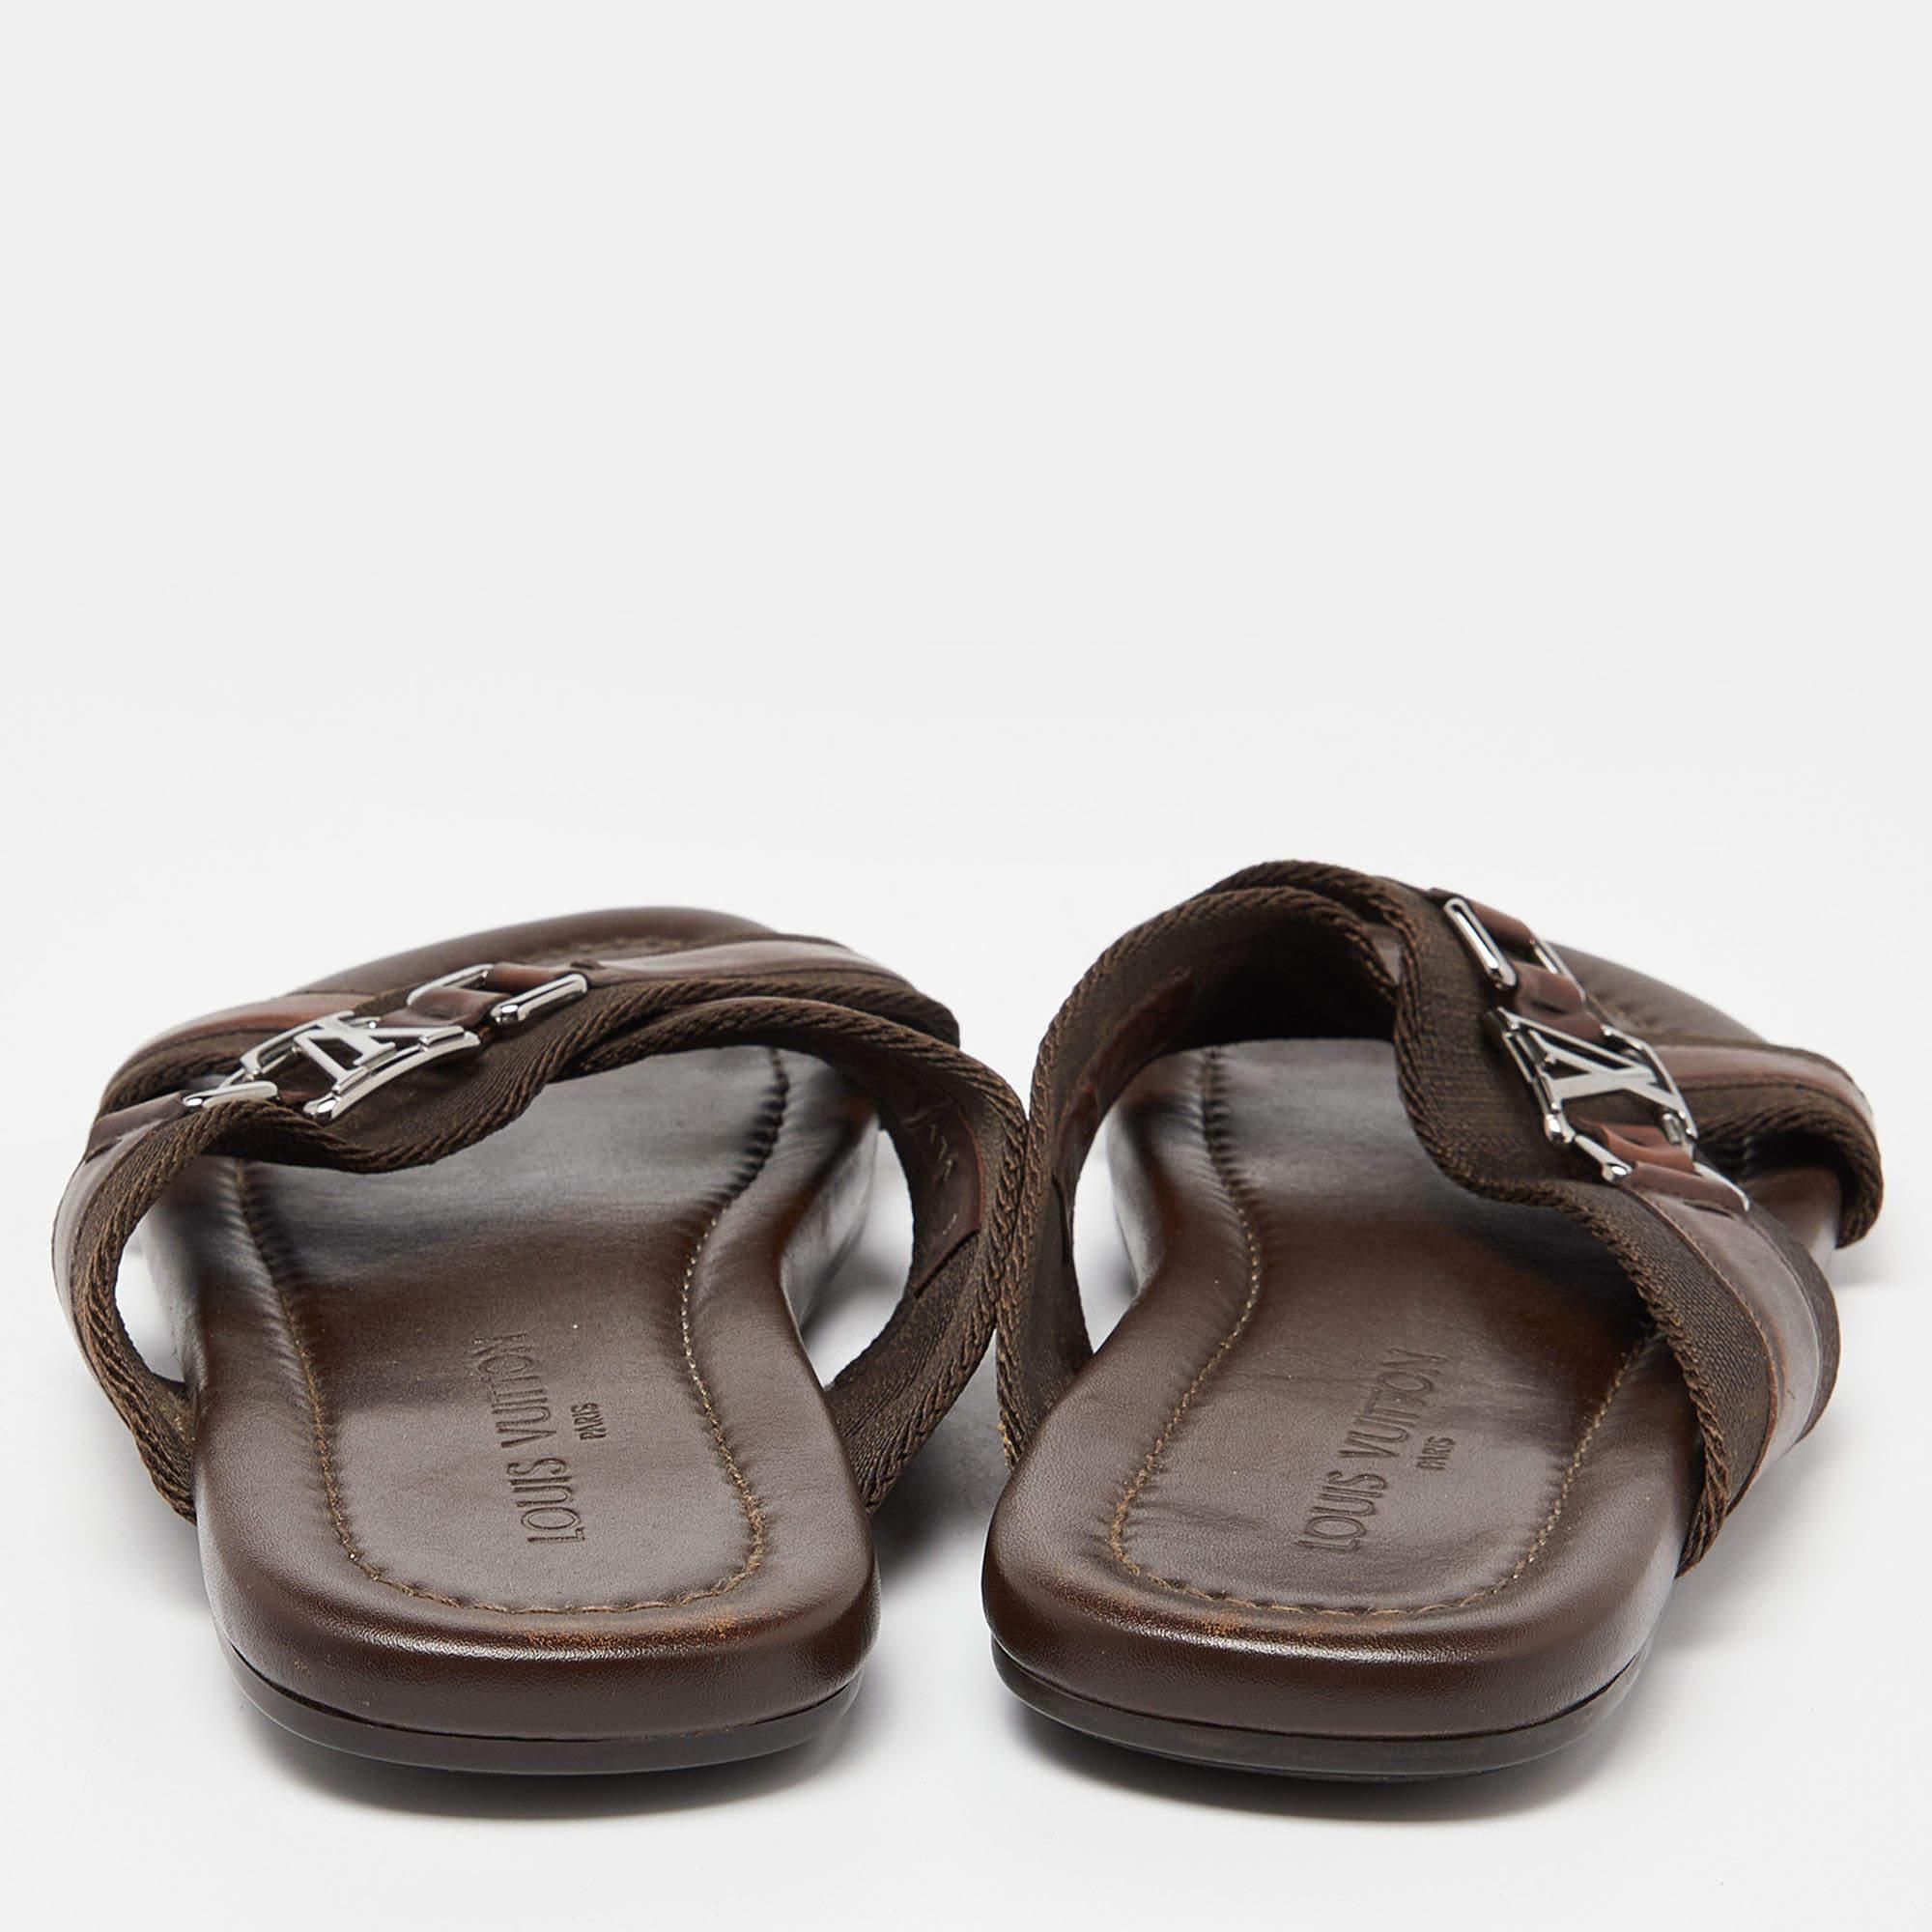 Frame your feet with these Louis Vuitton flat slides. Created using the best materials, the flats are perfect for everyday use.

